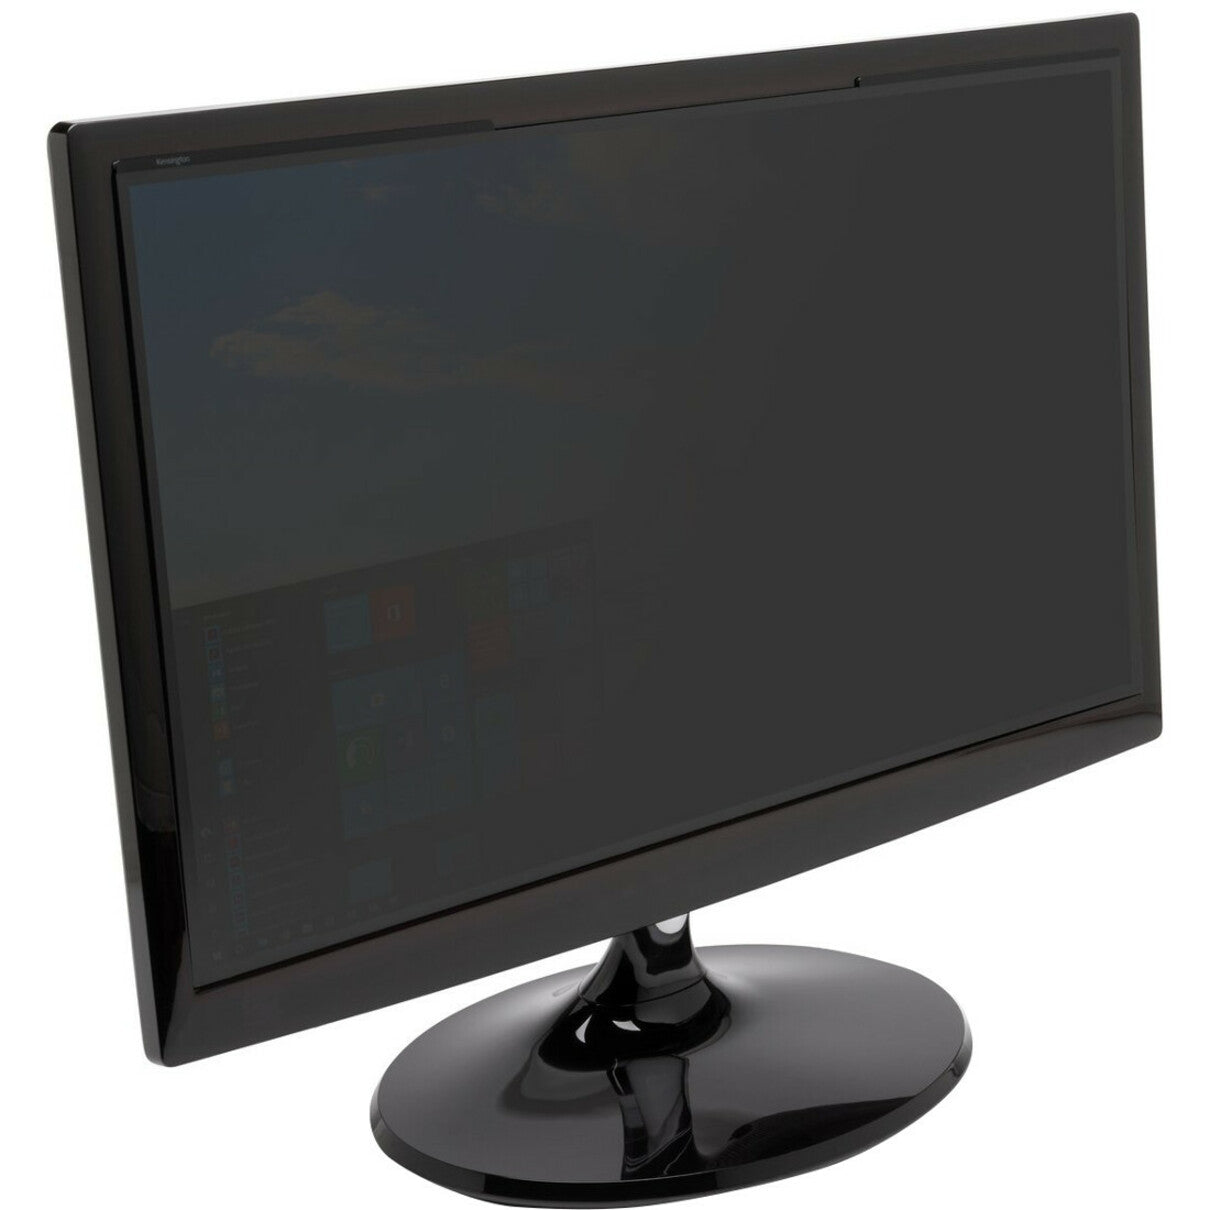 Kensington K58354WW MagPro 21.5" Monitor Privacy Screen with Magnetic Strip, Protect Your Privacy and Enhance Productivity